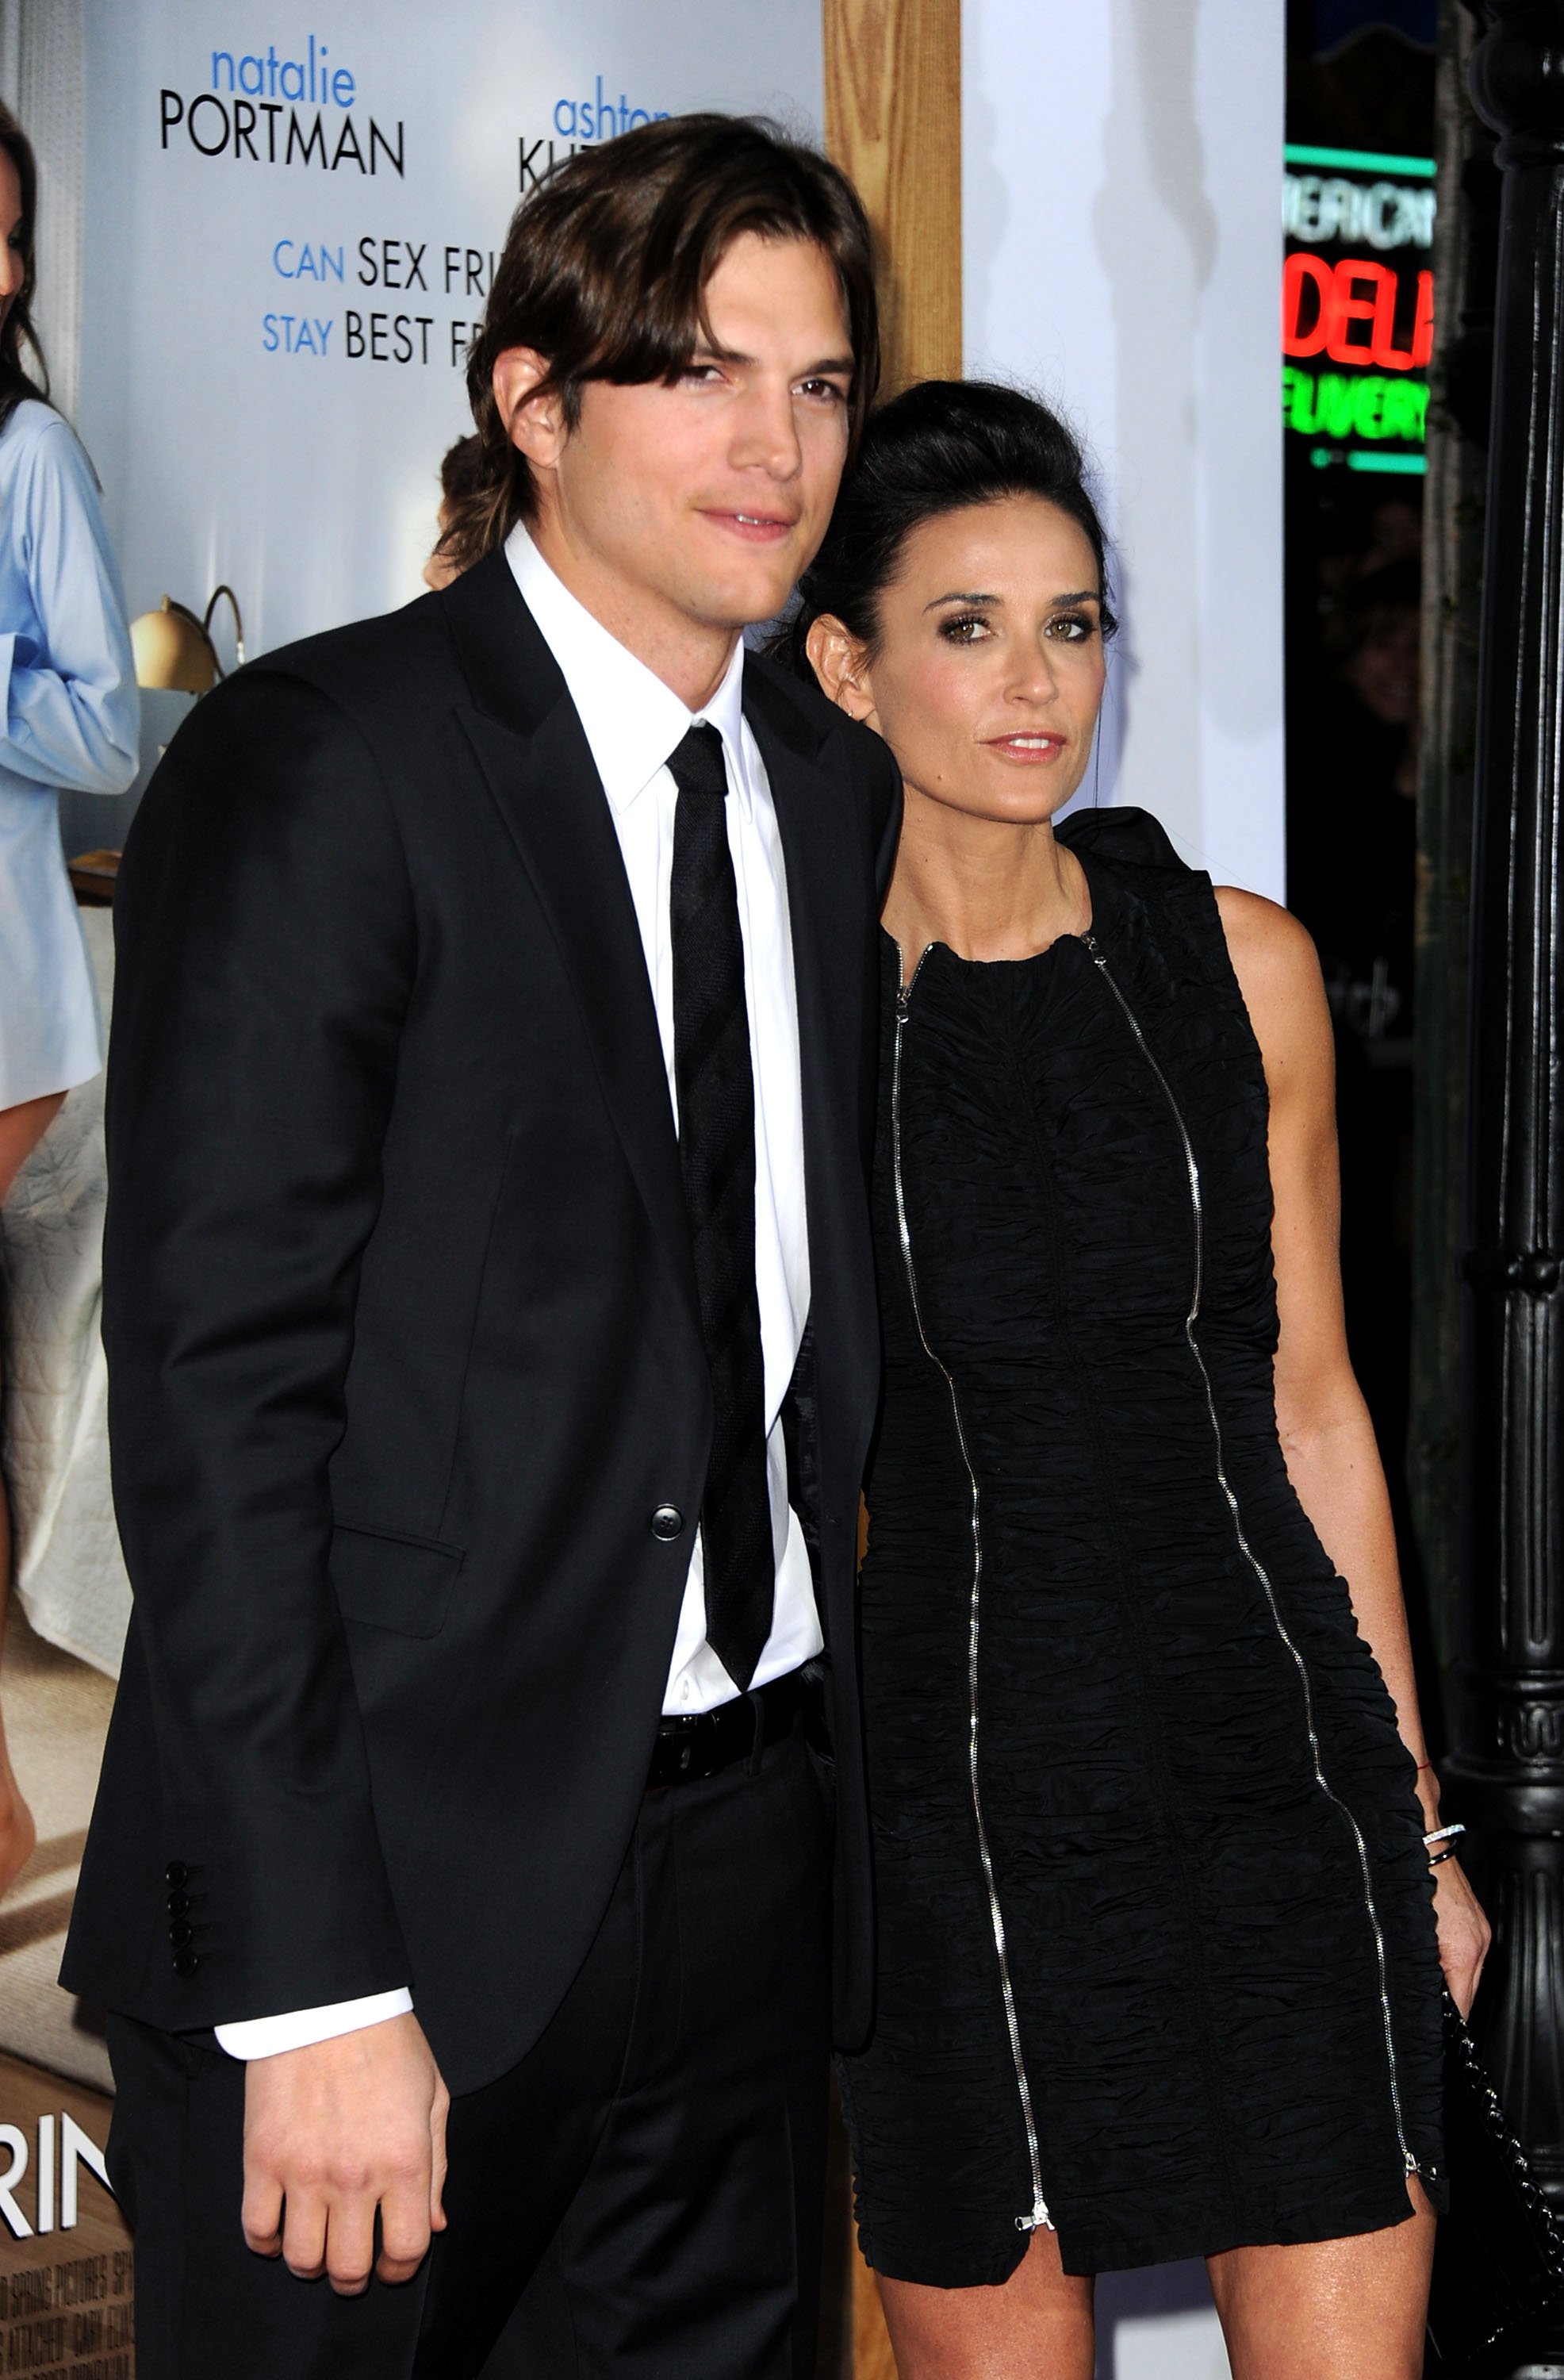 Ashton Kutcher and Demi Moore arrive at Paramount Pictures' "No Strings Attached" premiere | Source: Getty Images